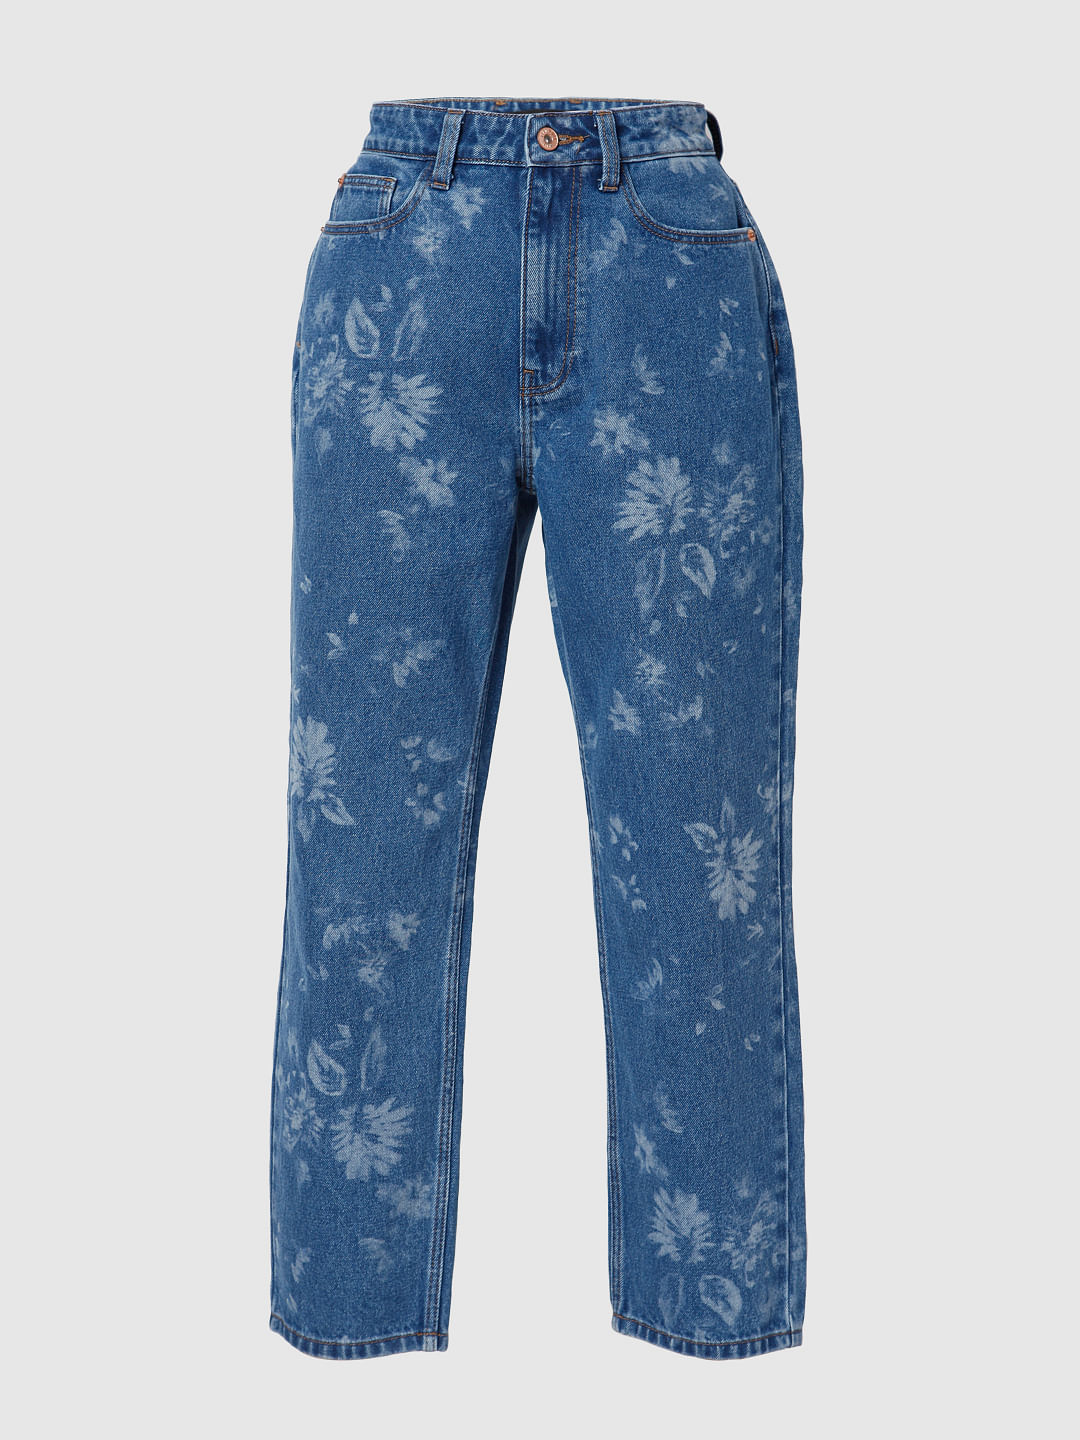 Buy HAUTEMODA Women's Jogger Fit Denim Printed Jeans (Blue_Size- 26) at  Amazon.in